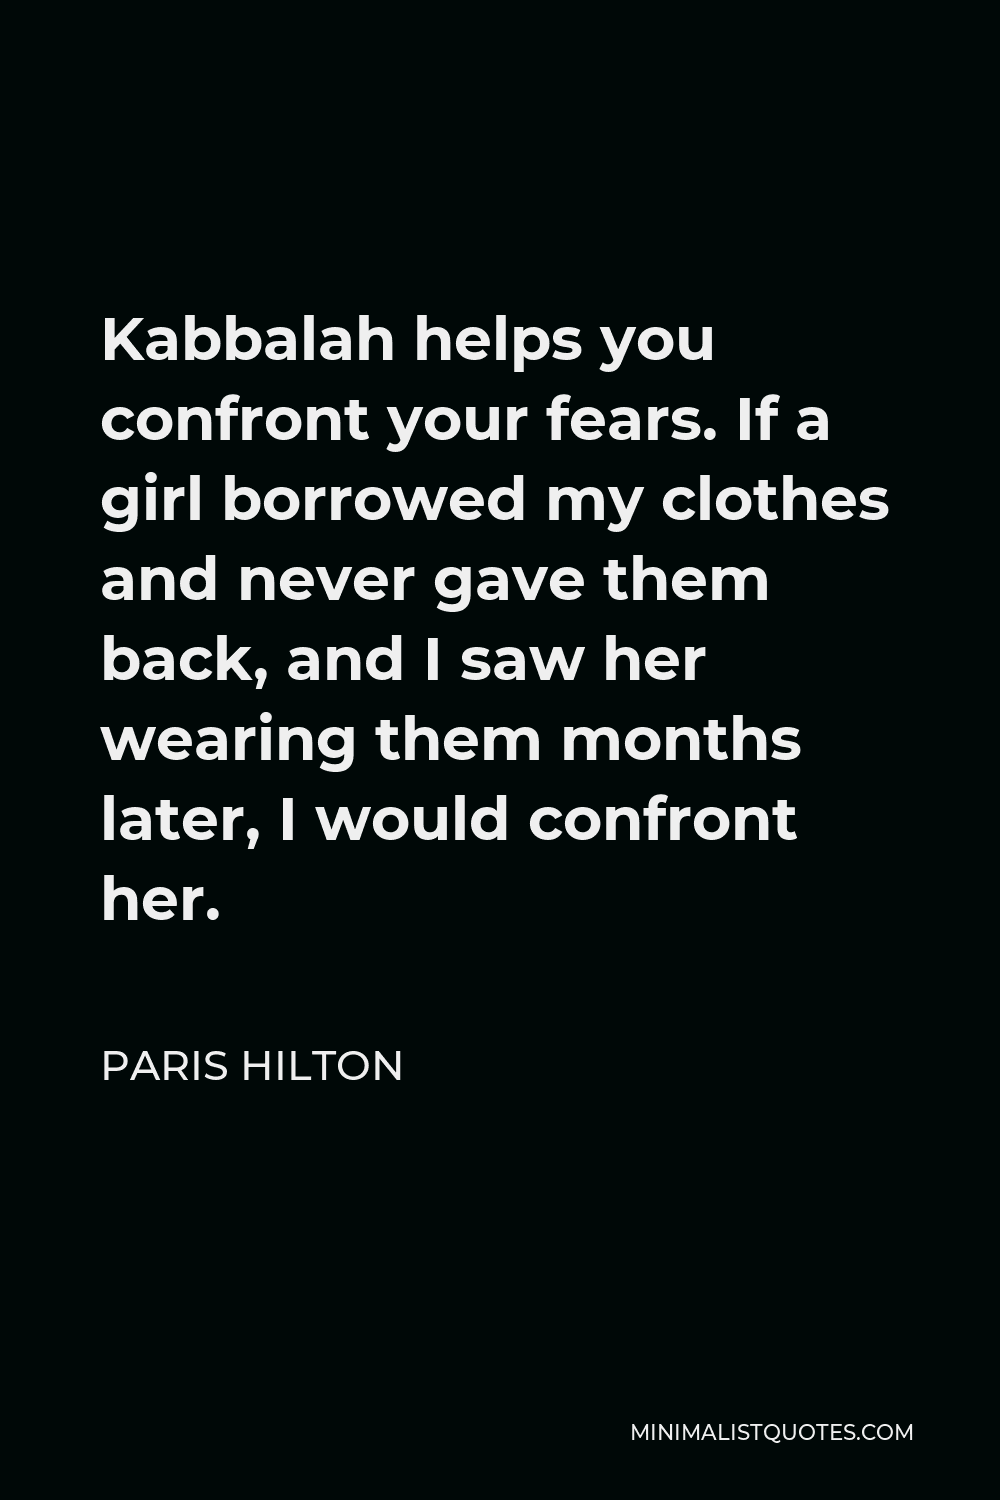 Paris Hilton Quote - Kabbalah helps you confront your fears. If a girl borrowed my clothes and never gave them back, and I saw her wearing them months later, I would confront her.